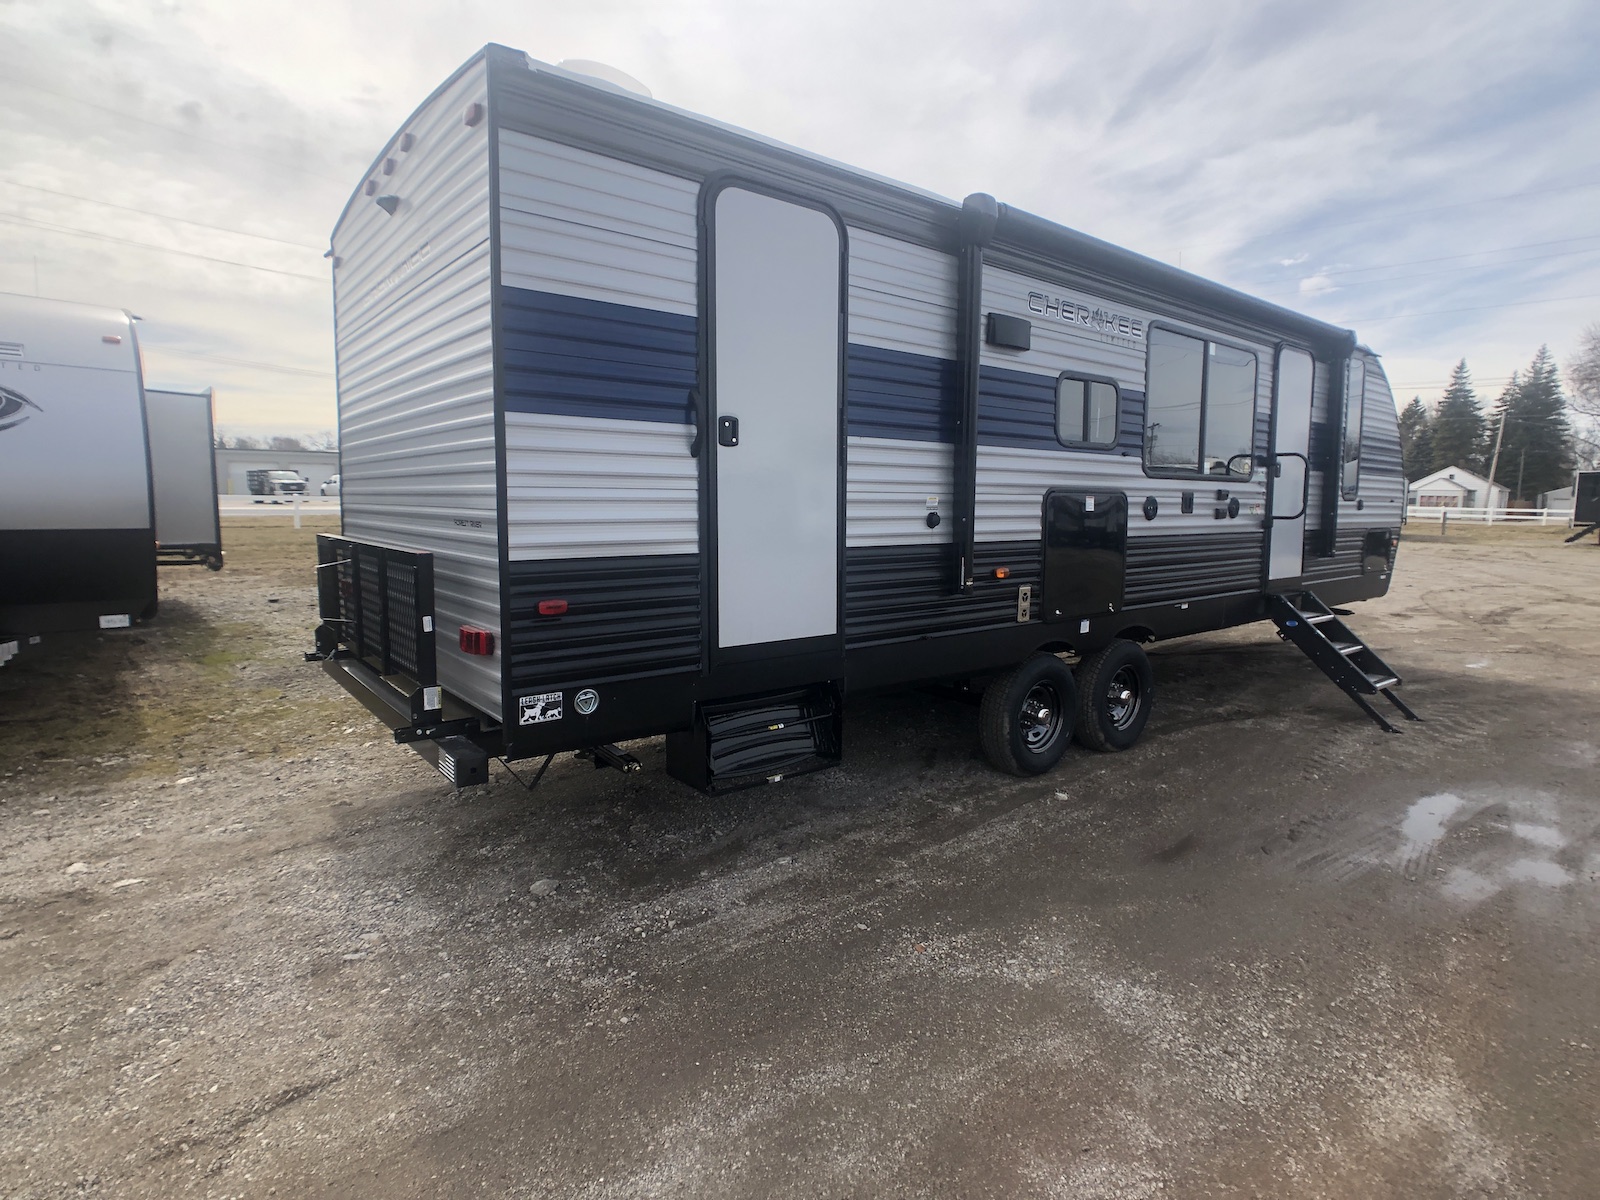 Bunkhouse Travel Trailer For Sale - travel cubes au Best Bunkhouse Travel Trailers Under 6000 Lbs